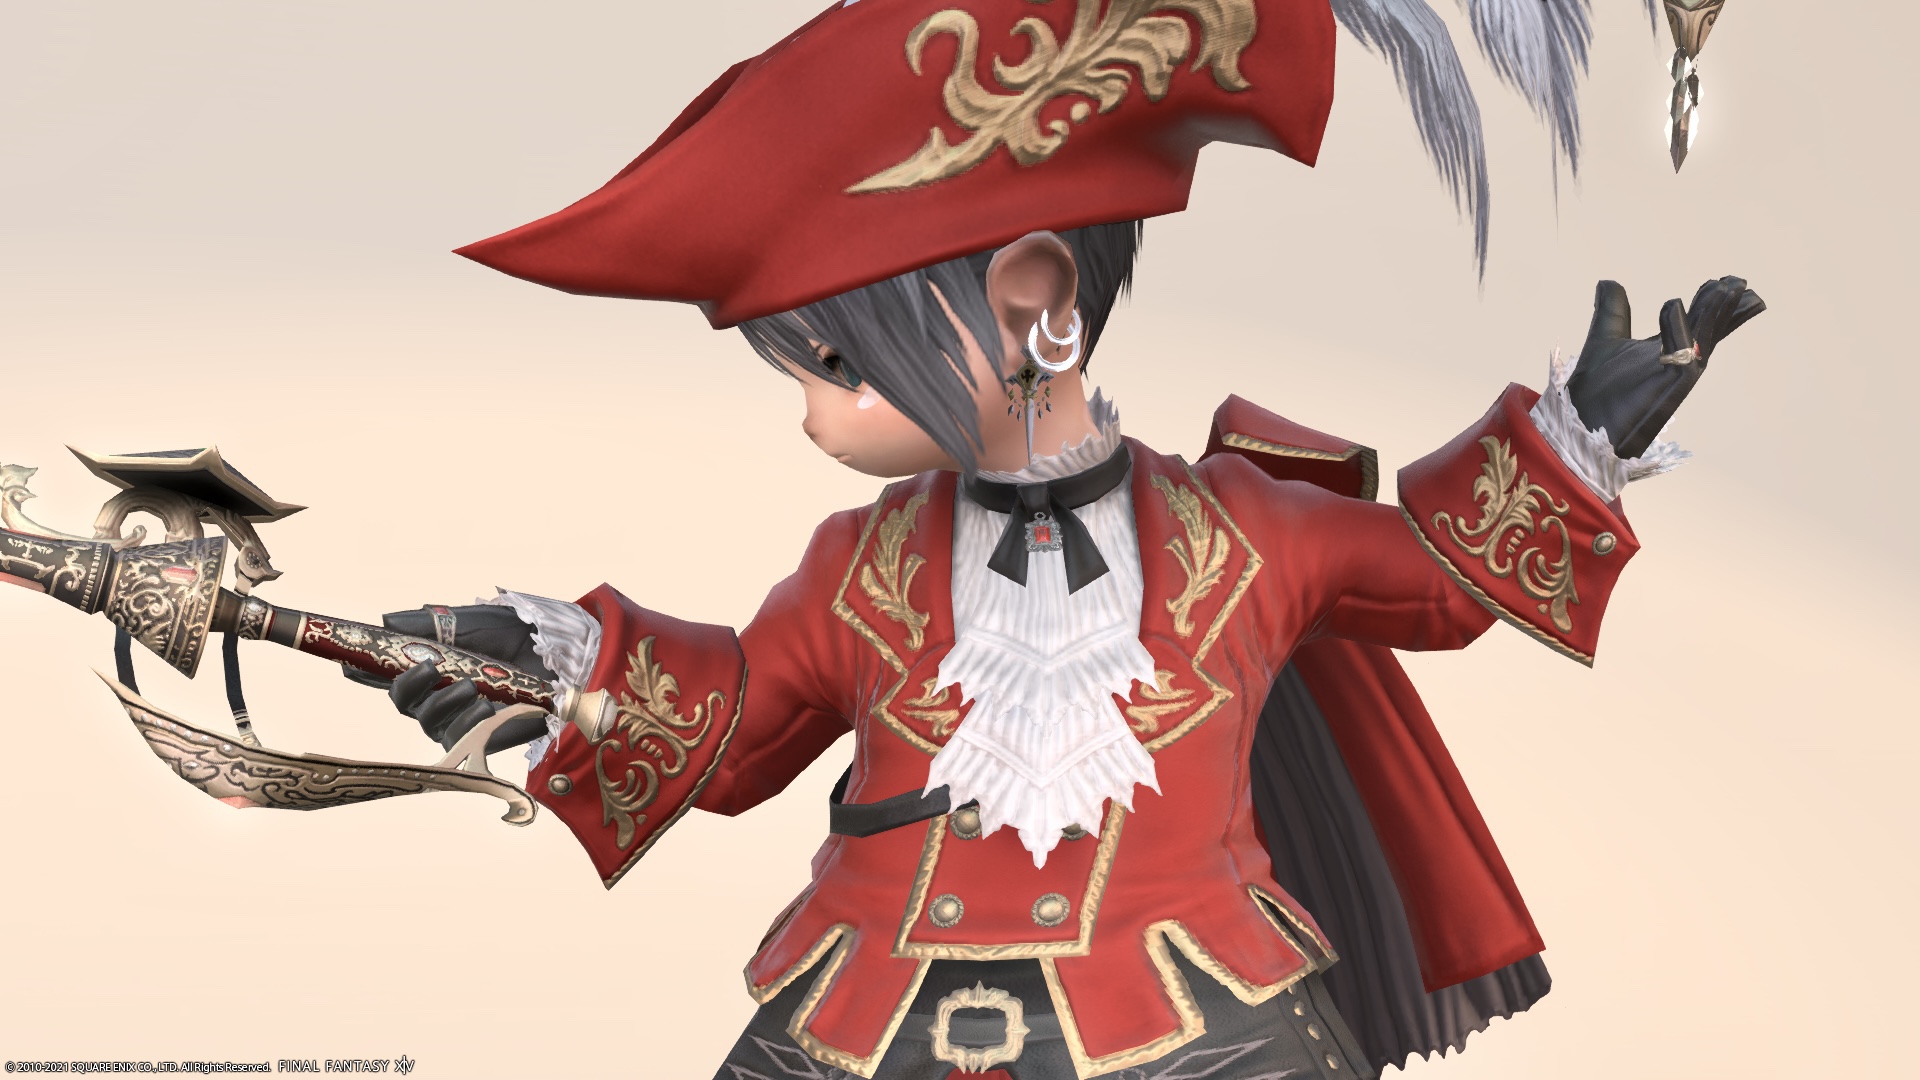 Red Mage Af4 Noble Fashionable Les Trois Mousquetaires Estoqueur Series Lalafell Men S Ver Norirow Note エオルゼア戦記 Ff14ブログ